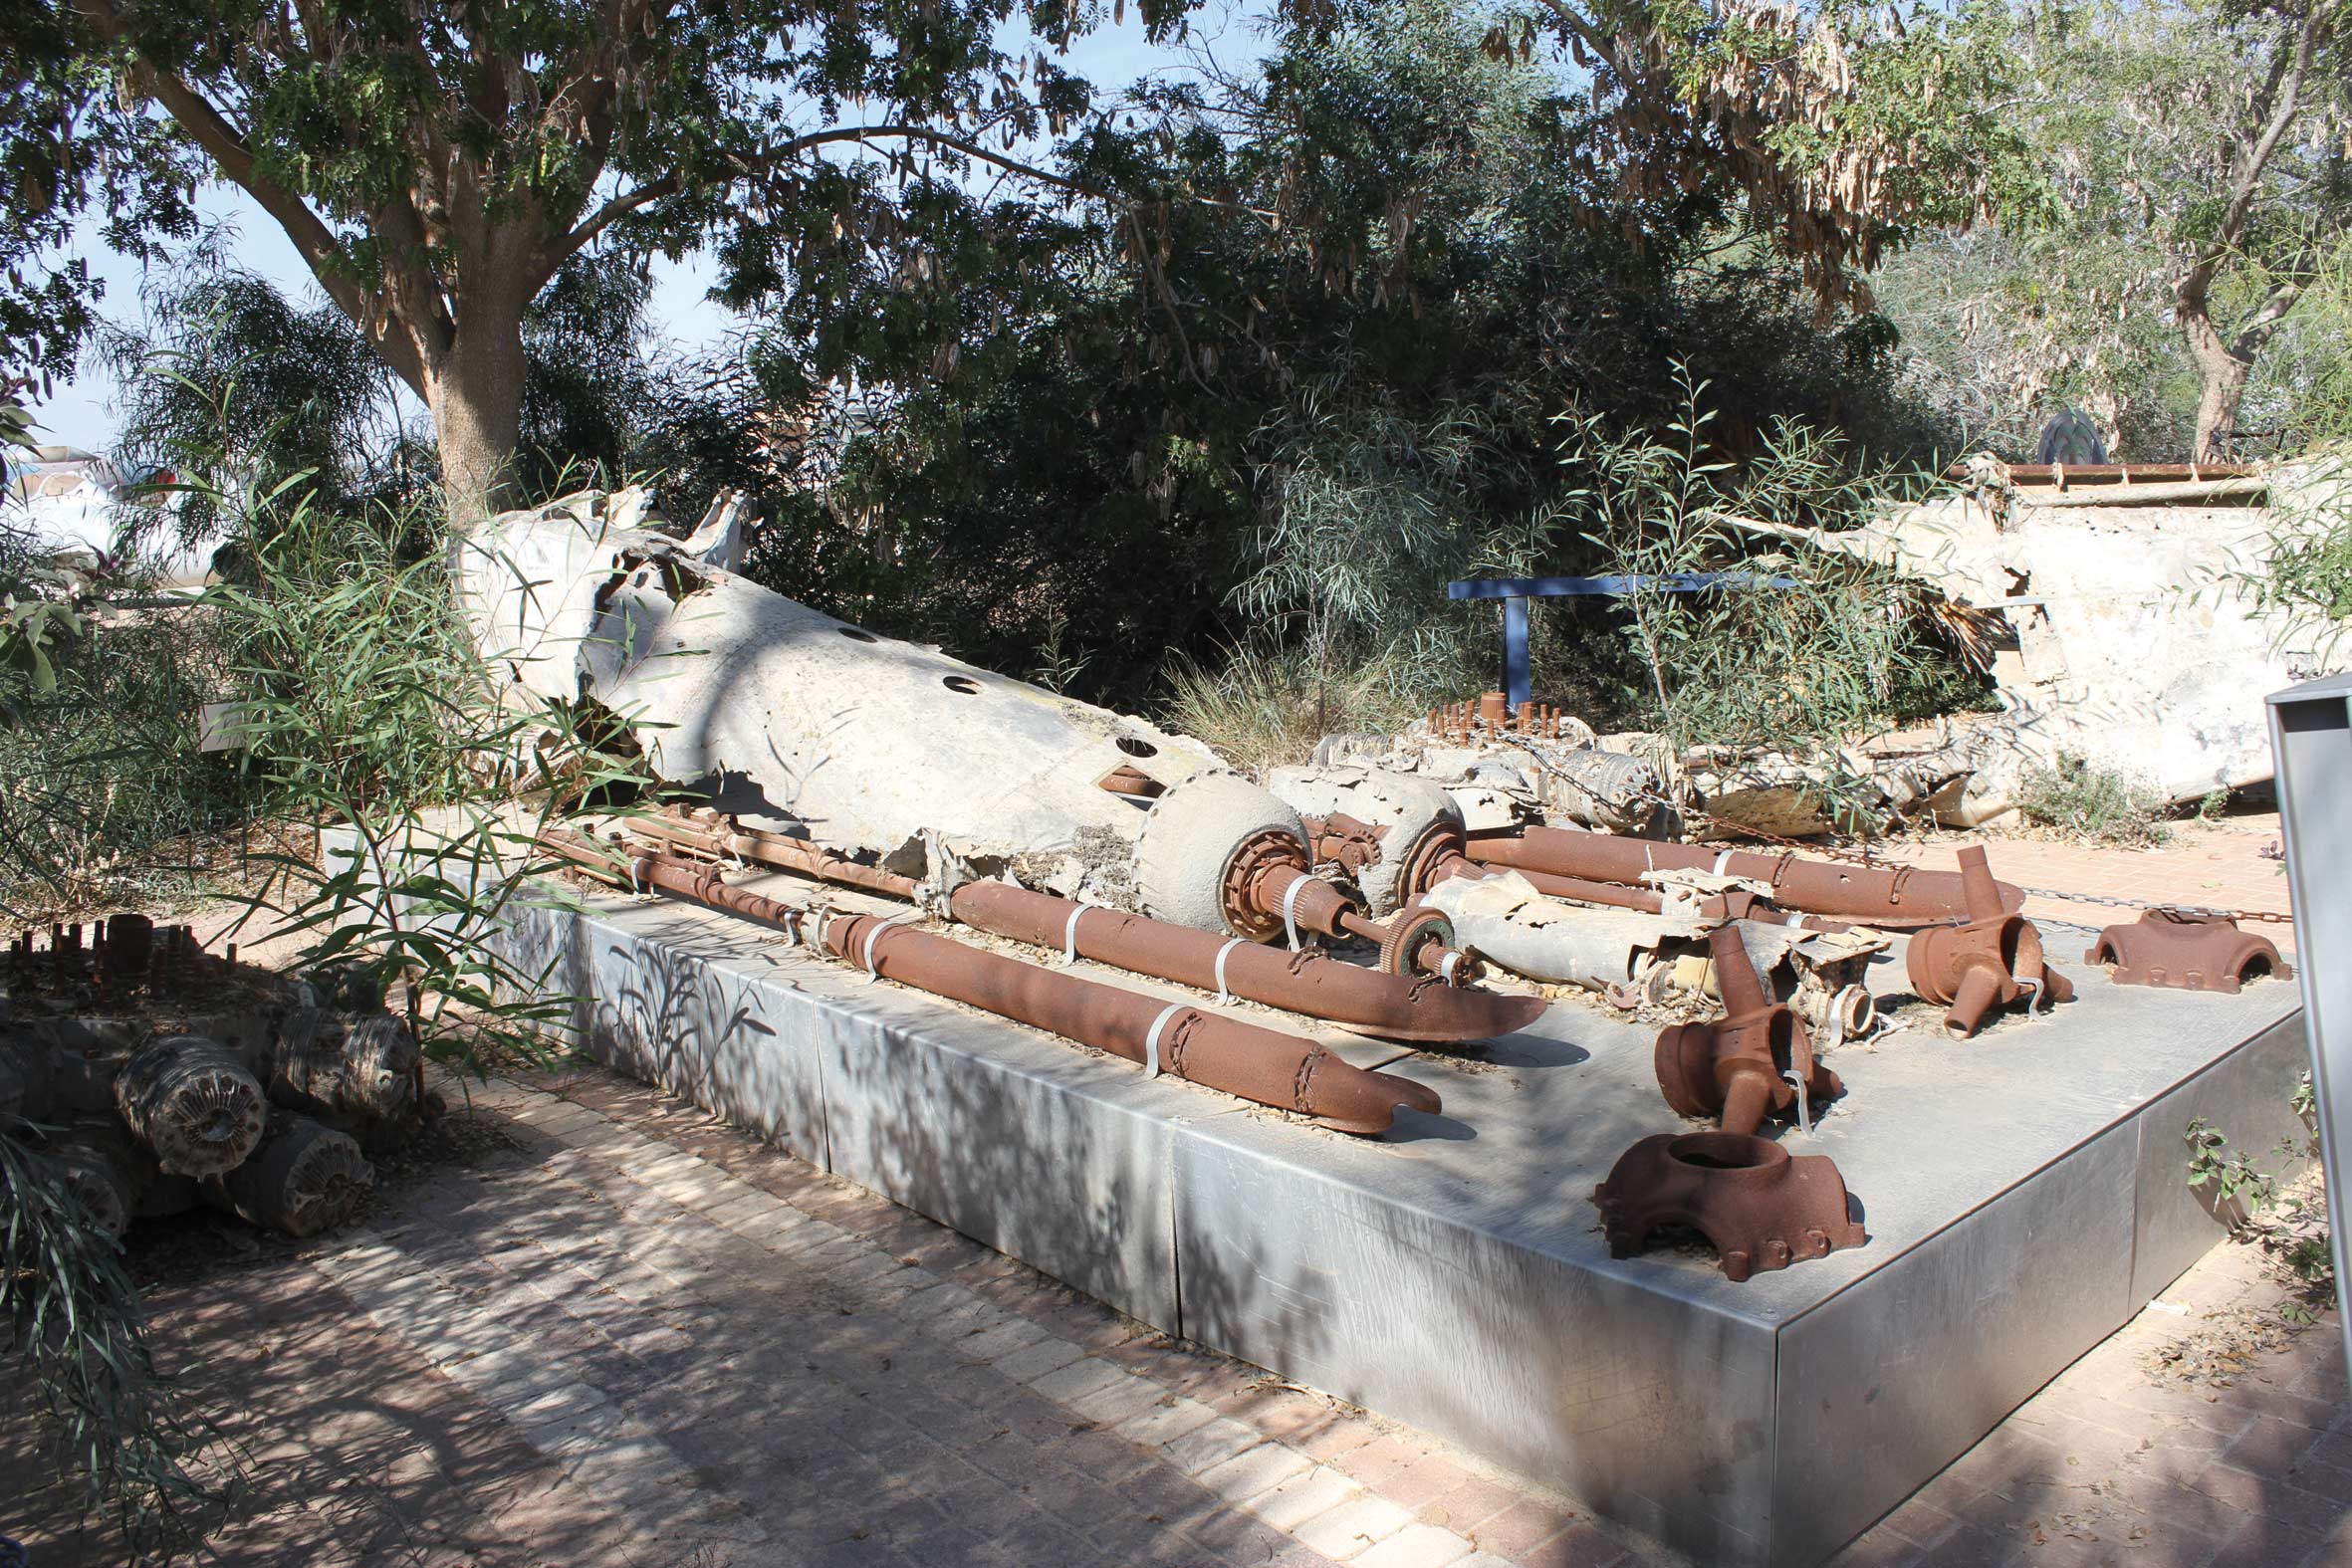 All that remains of the Israeli Beaufighter plane that crashed in the Ashdod sand dunes in 1948, incorporated into a monument at the Israeli Air Force Museum